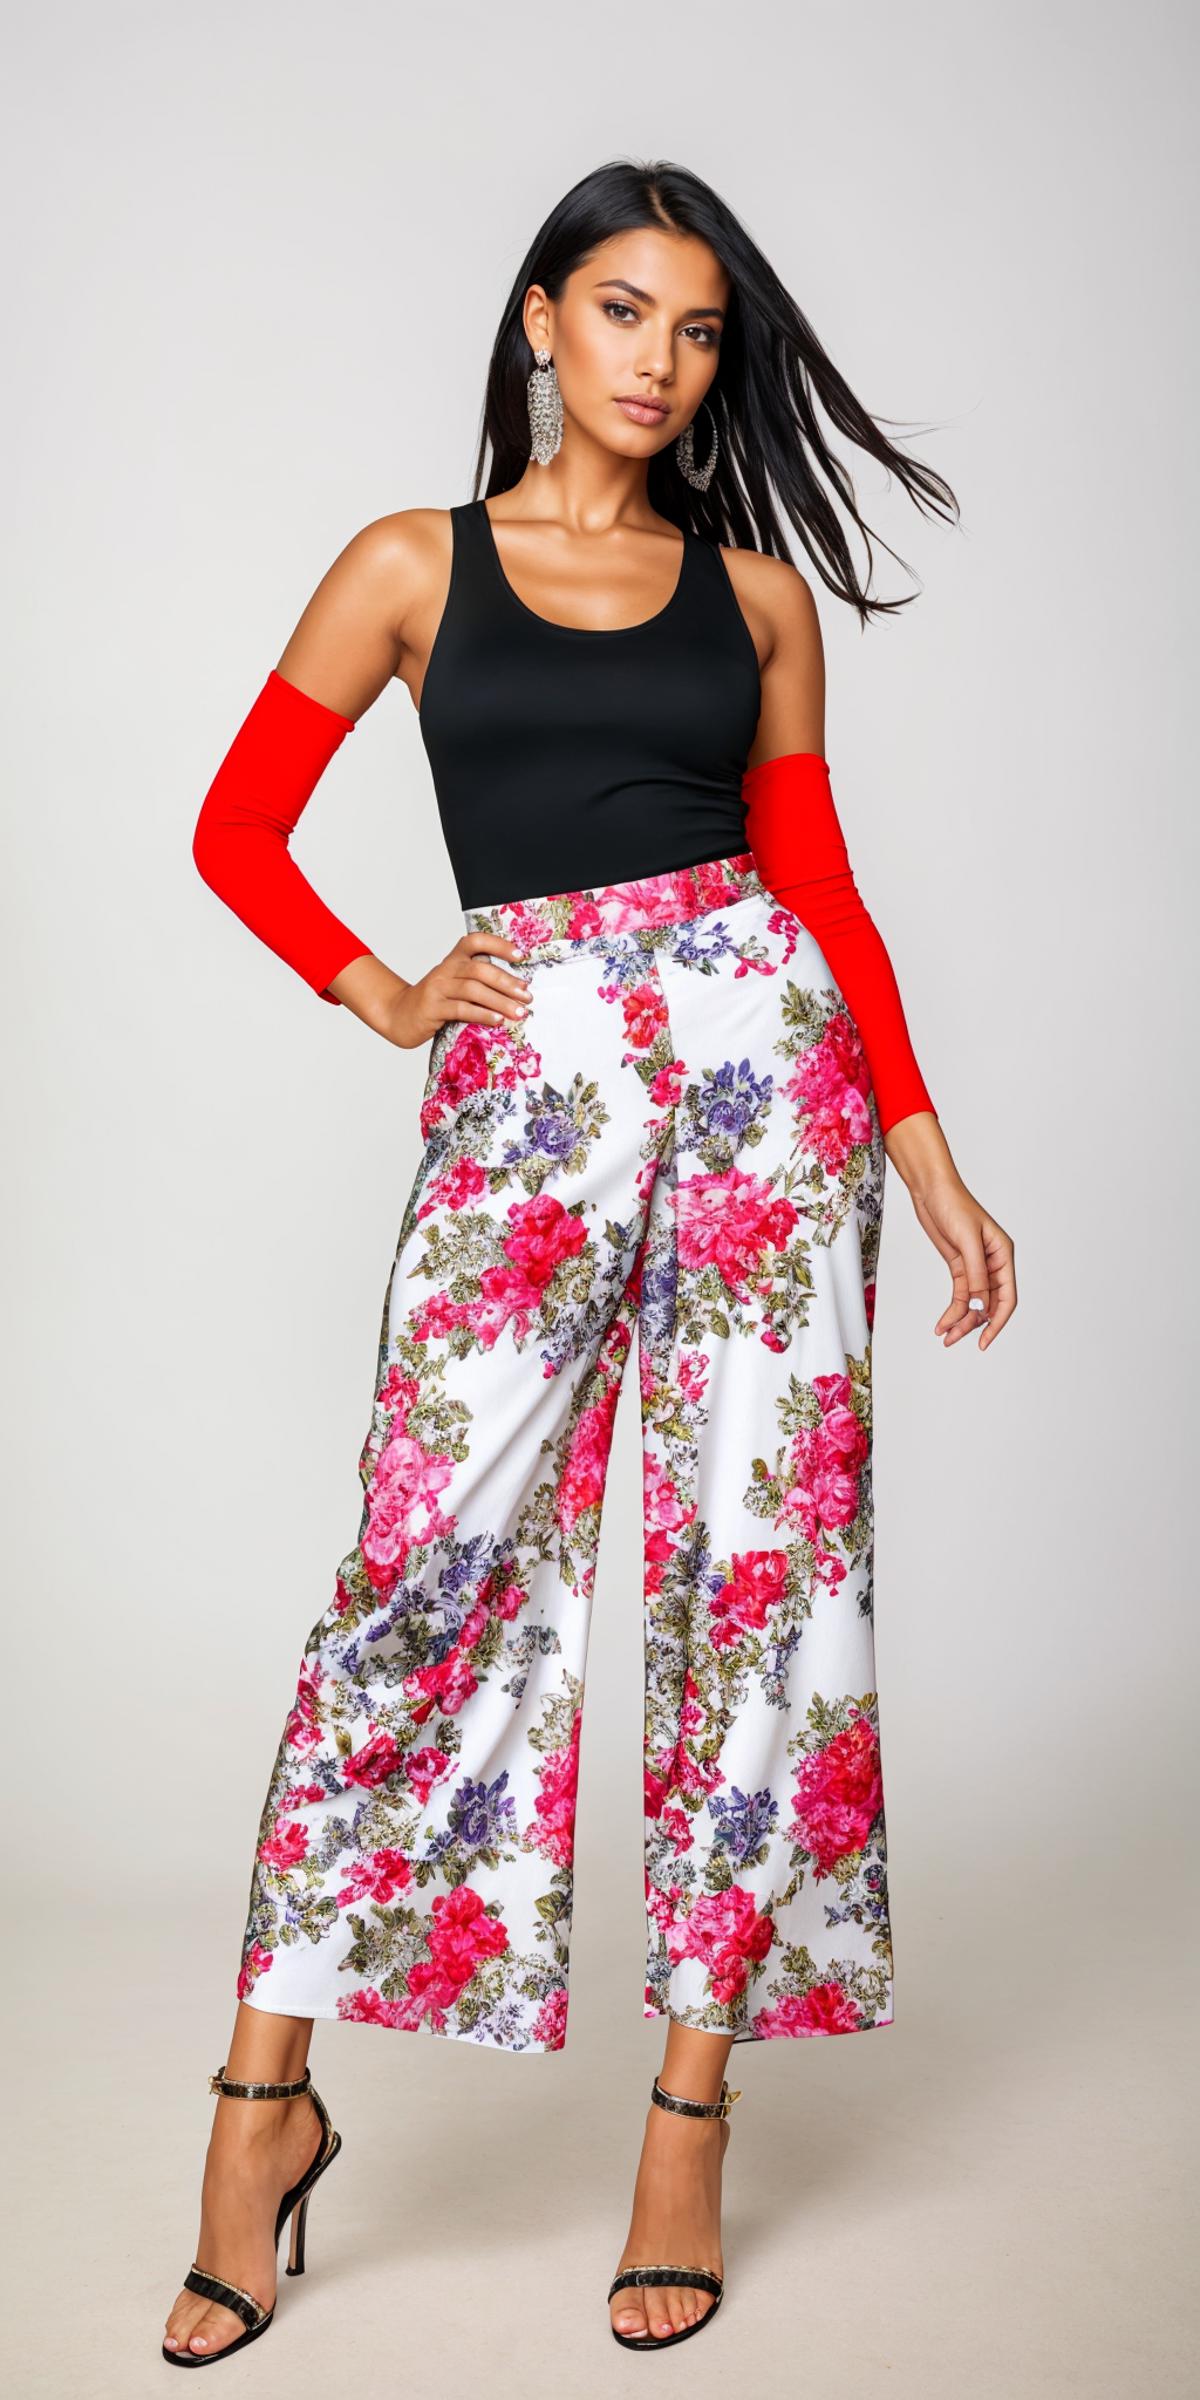 Palazzo Pants - By EDG - Featuring Divas by Alexds9 image by EDG